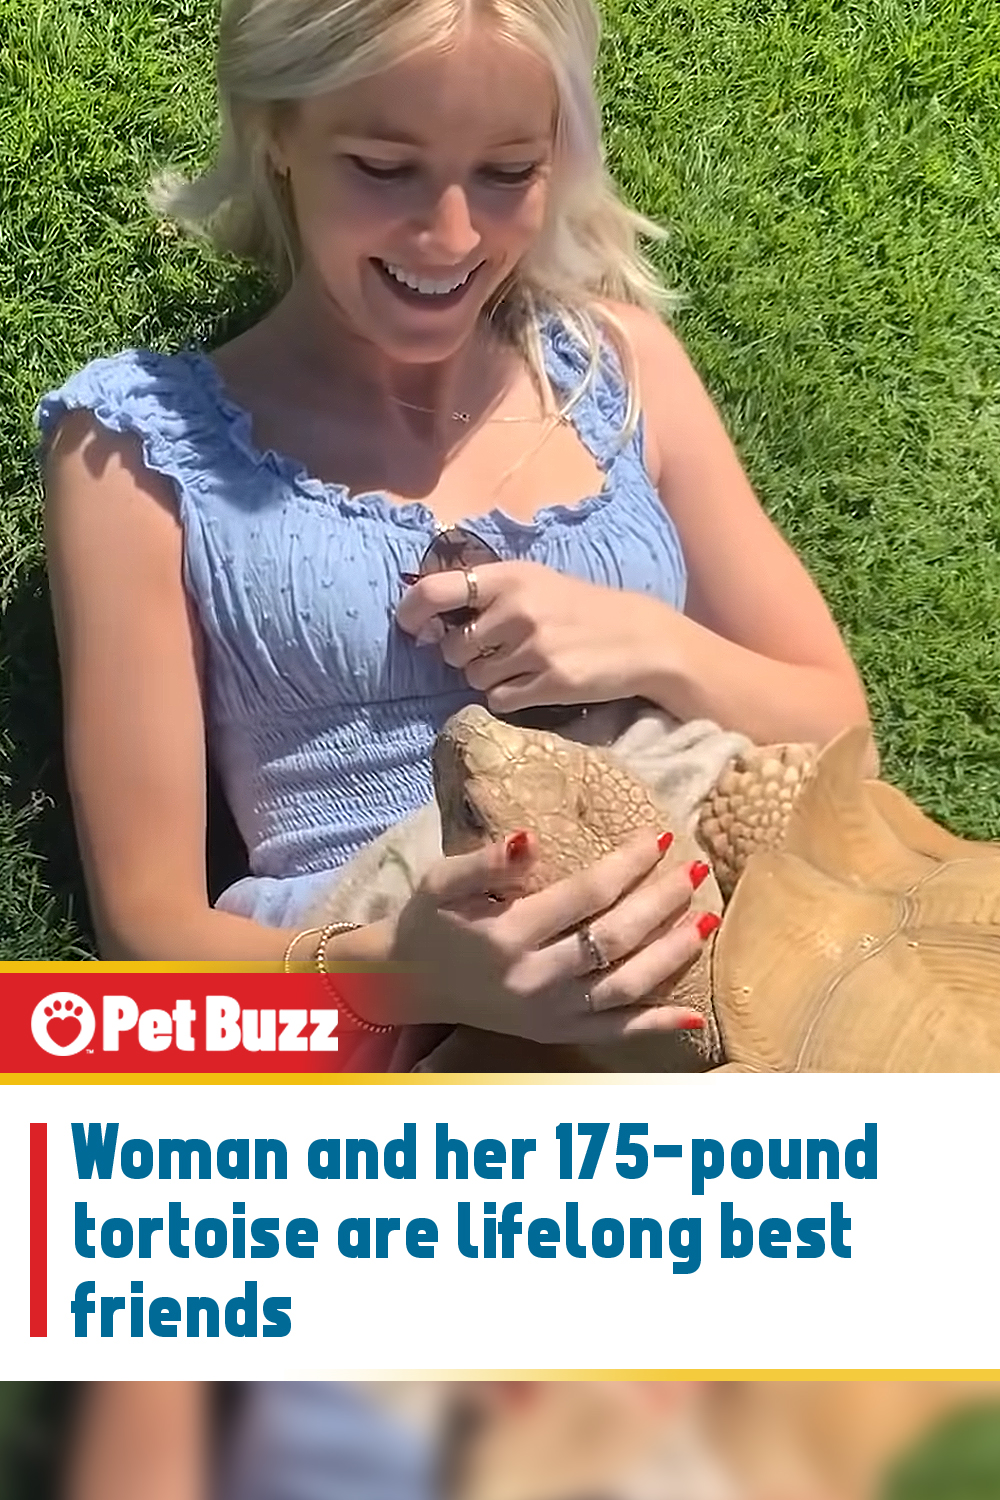 Woman and her 175-pound tortoise are lifelong best friends